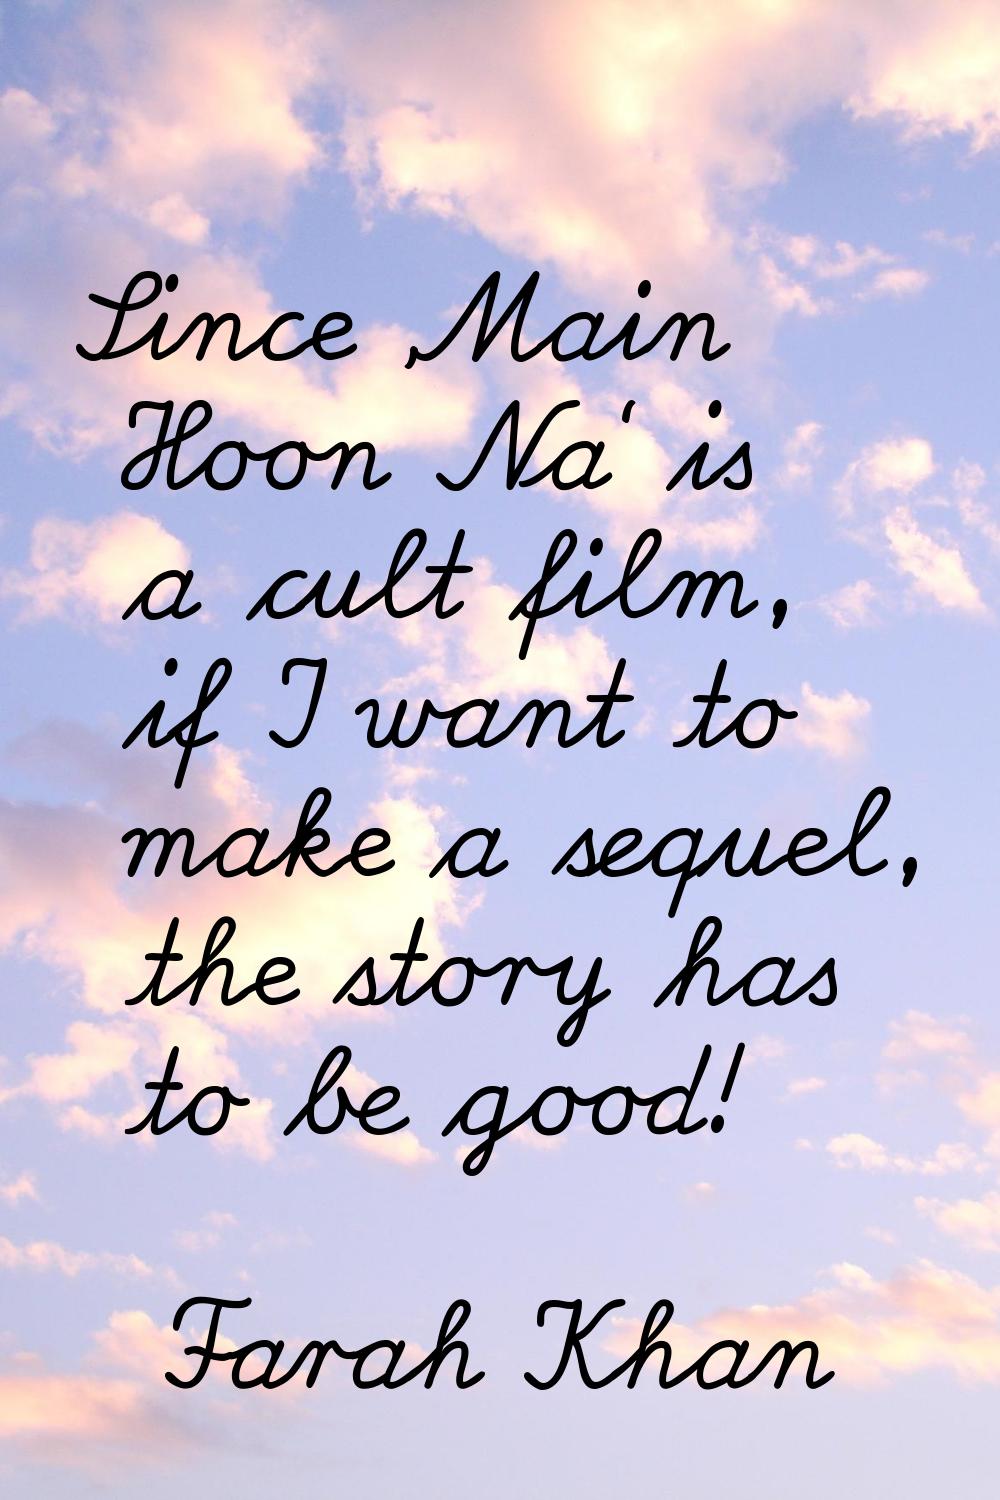 Since 'Main Hoon Na' is a cult film, if I want to make a sequel, the story has to be good!